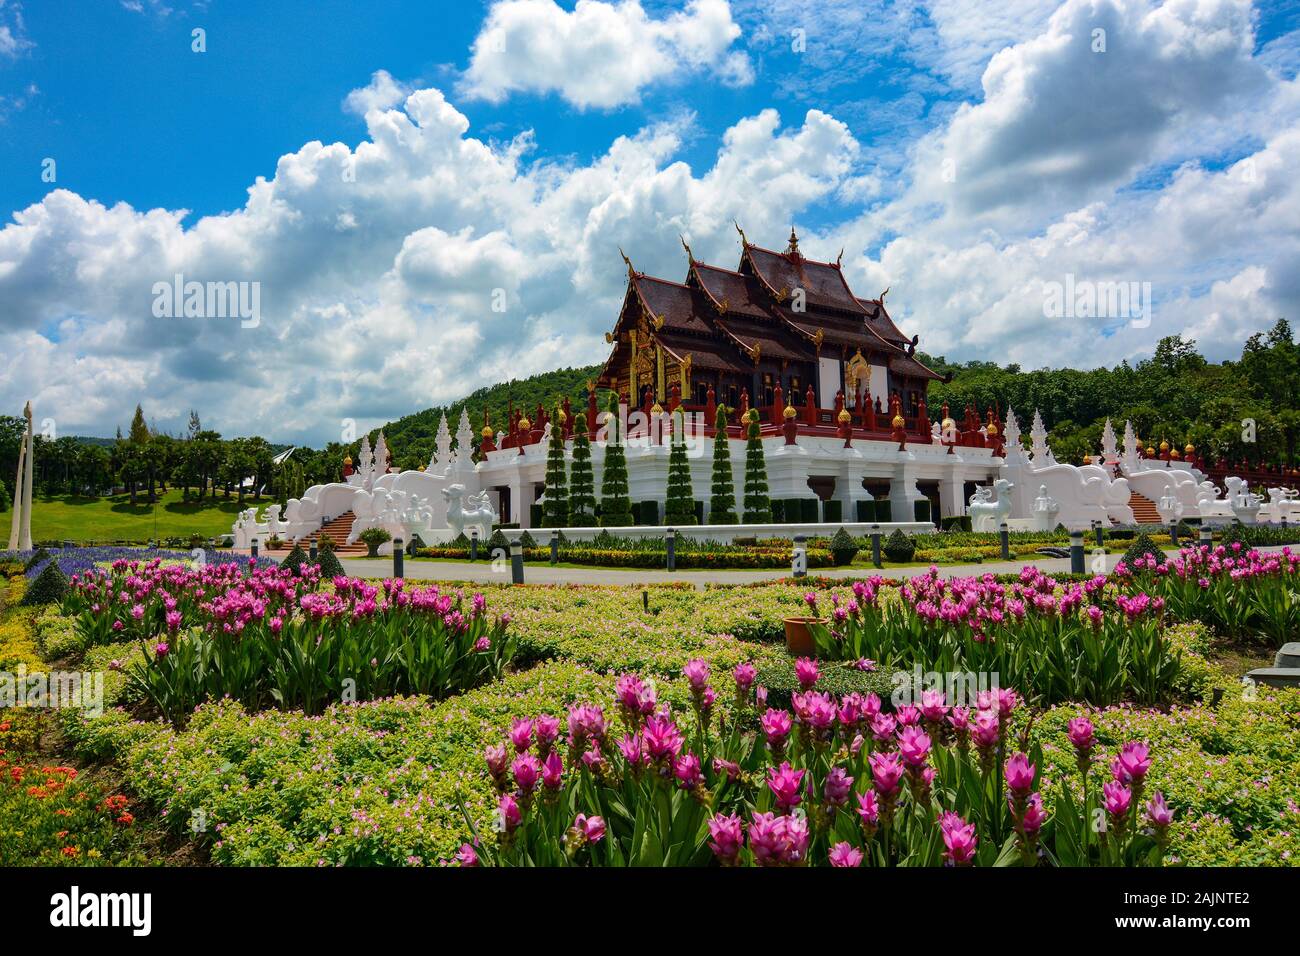 Pink flower gardens by the pavilion at Royal Park Rajapruek in Chiang Mai, Thailand Stock Photo